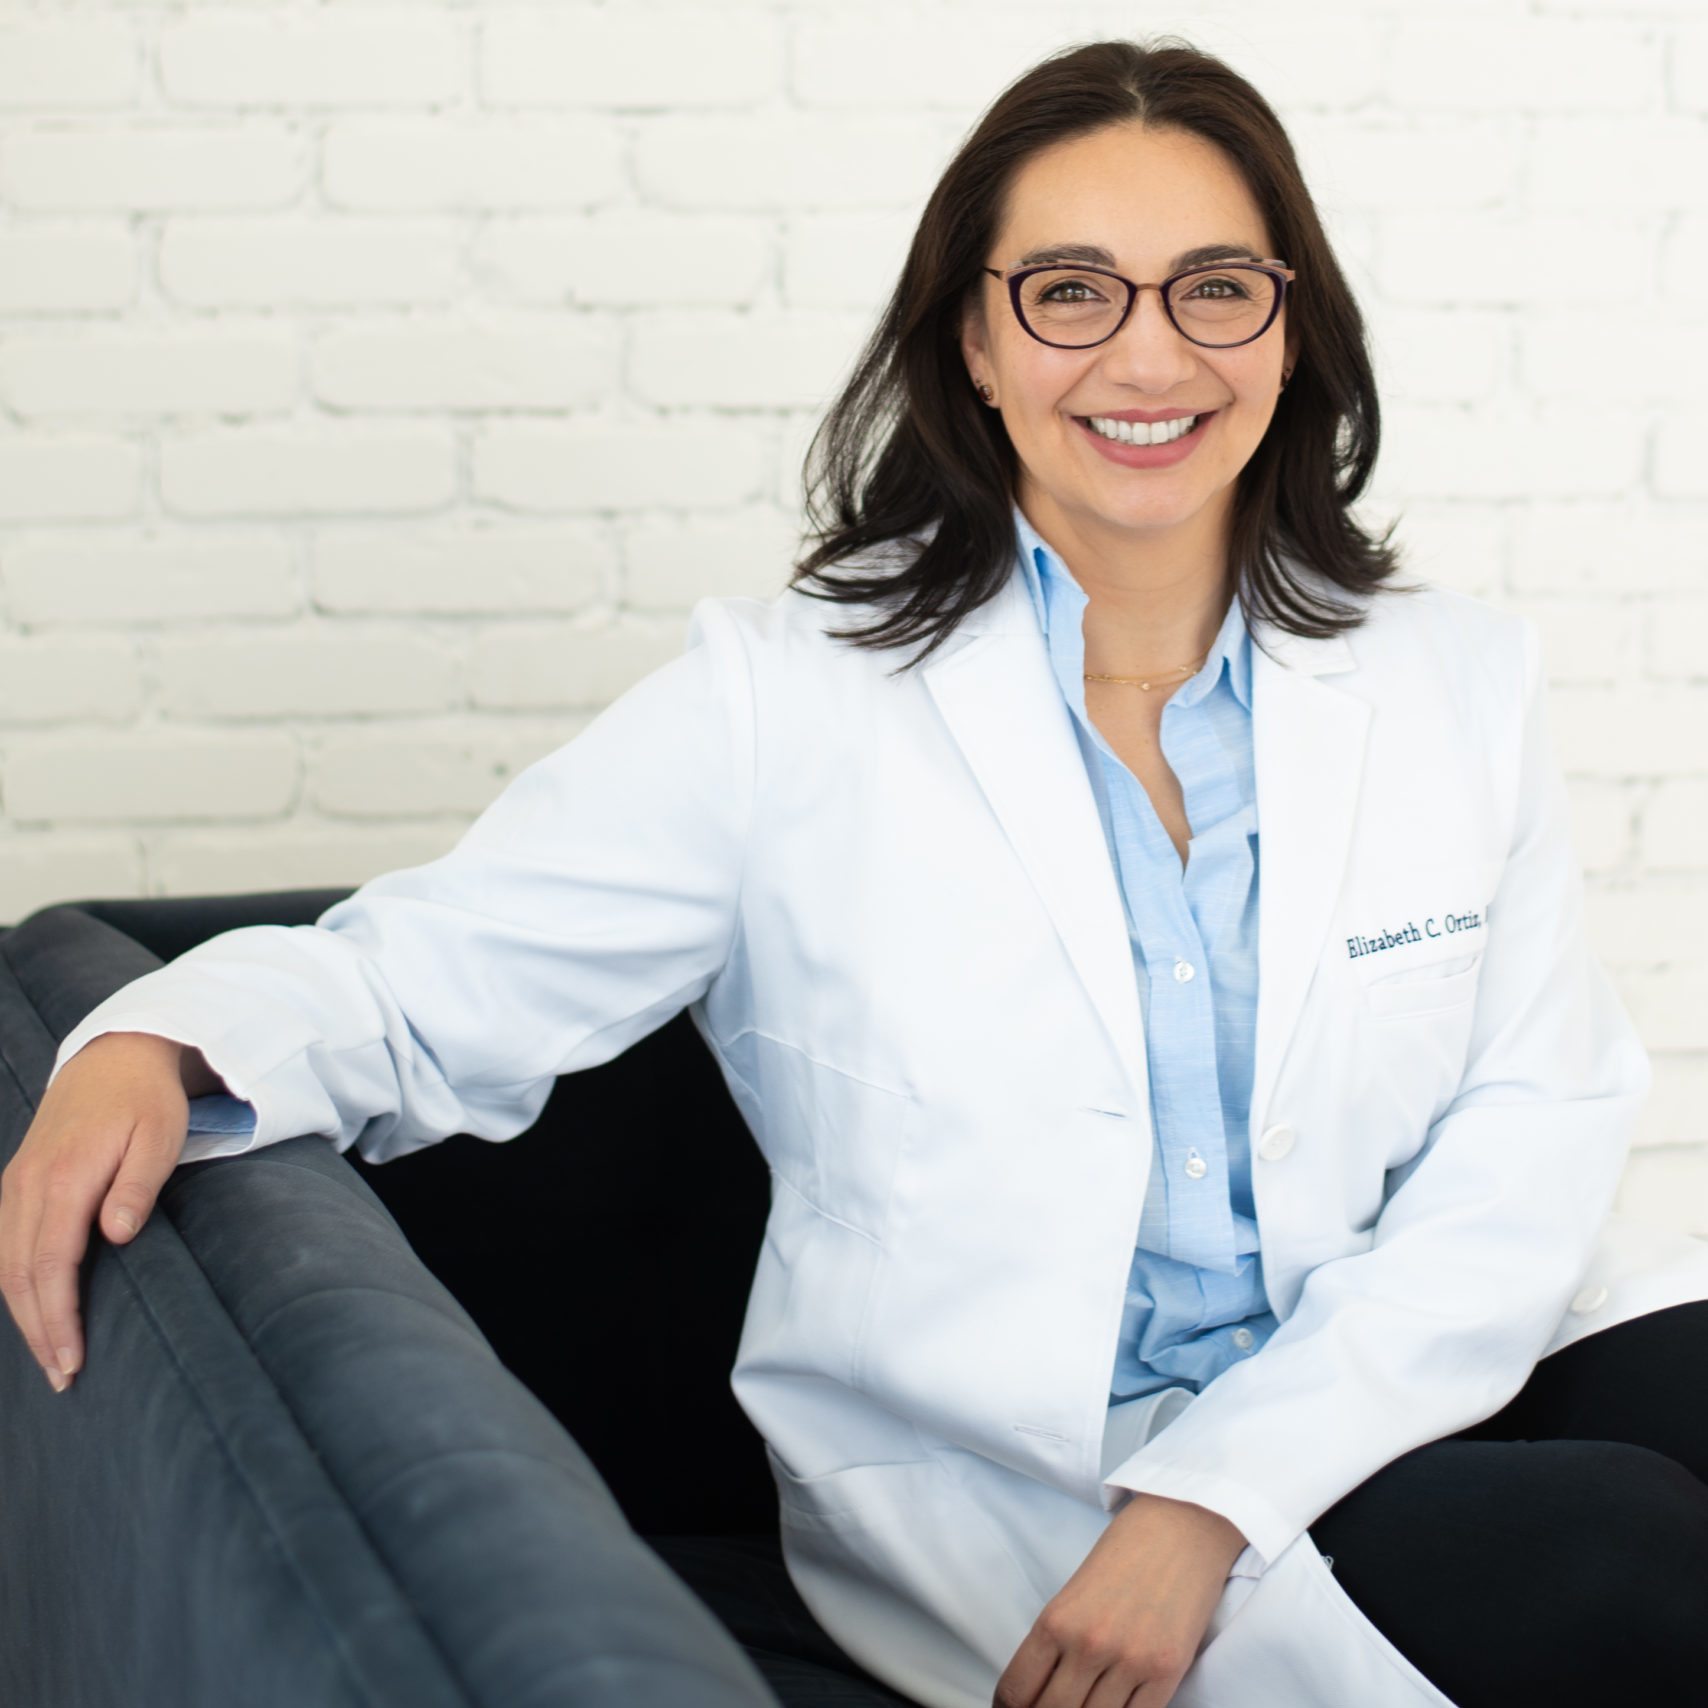 Dr. Elizabeth Ortiz brings state of the art rheumatology care to your home